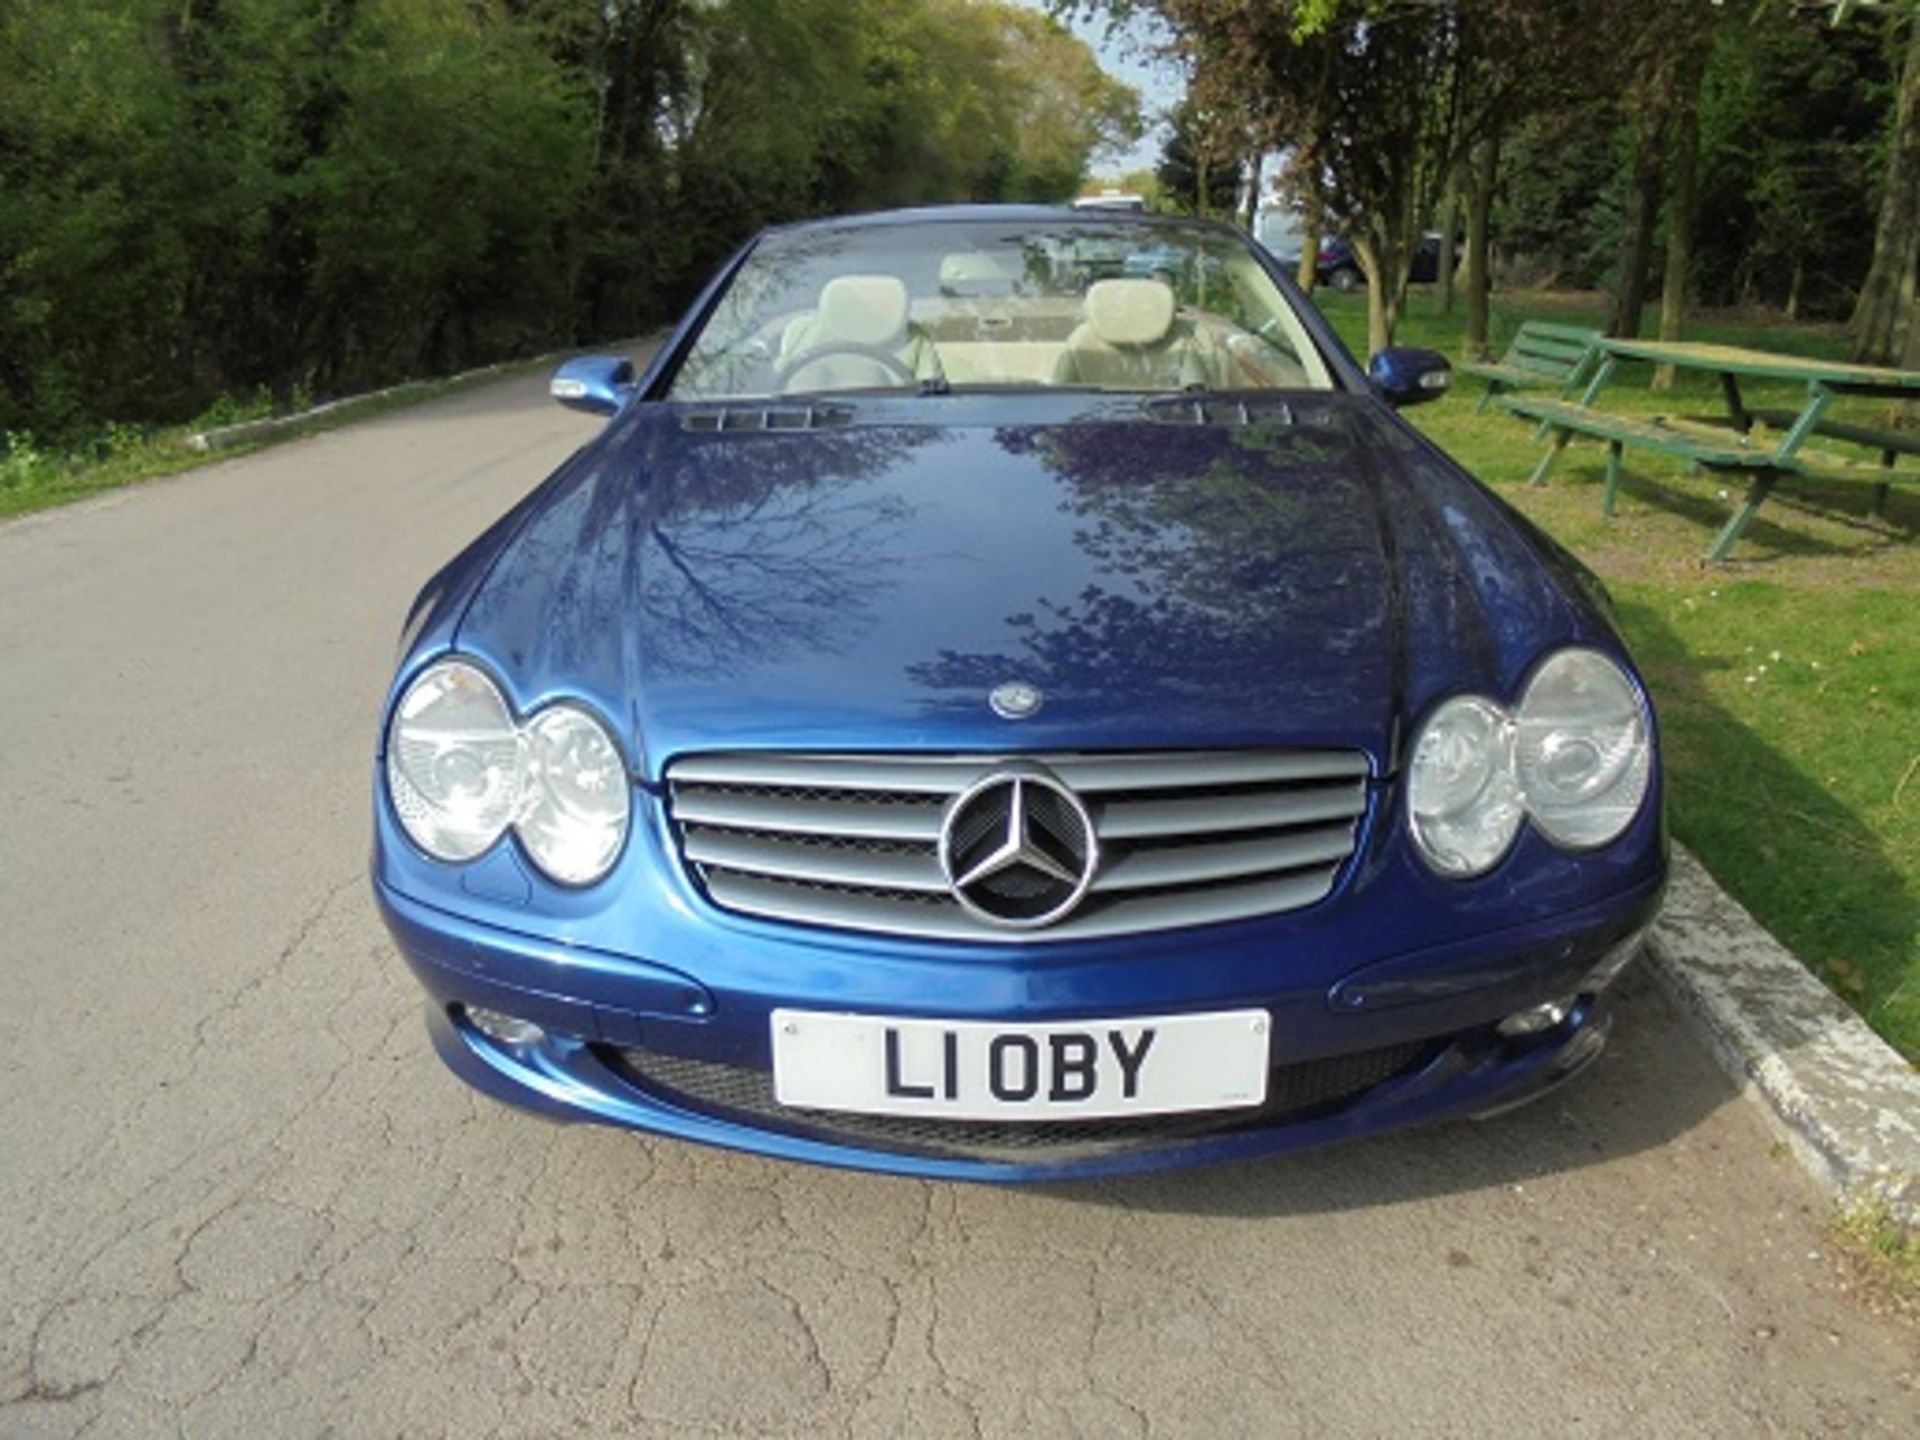 MERCEDES SL350 CONVERTIBLE WITH PRIVATE PLATE: L1OBY INCLUDED - Image 8 of 12